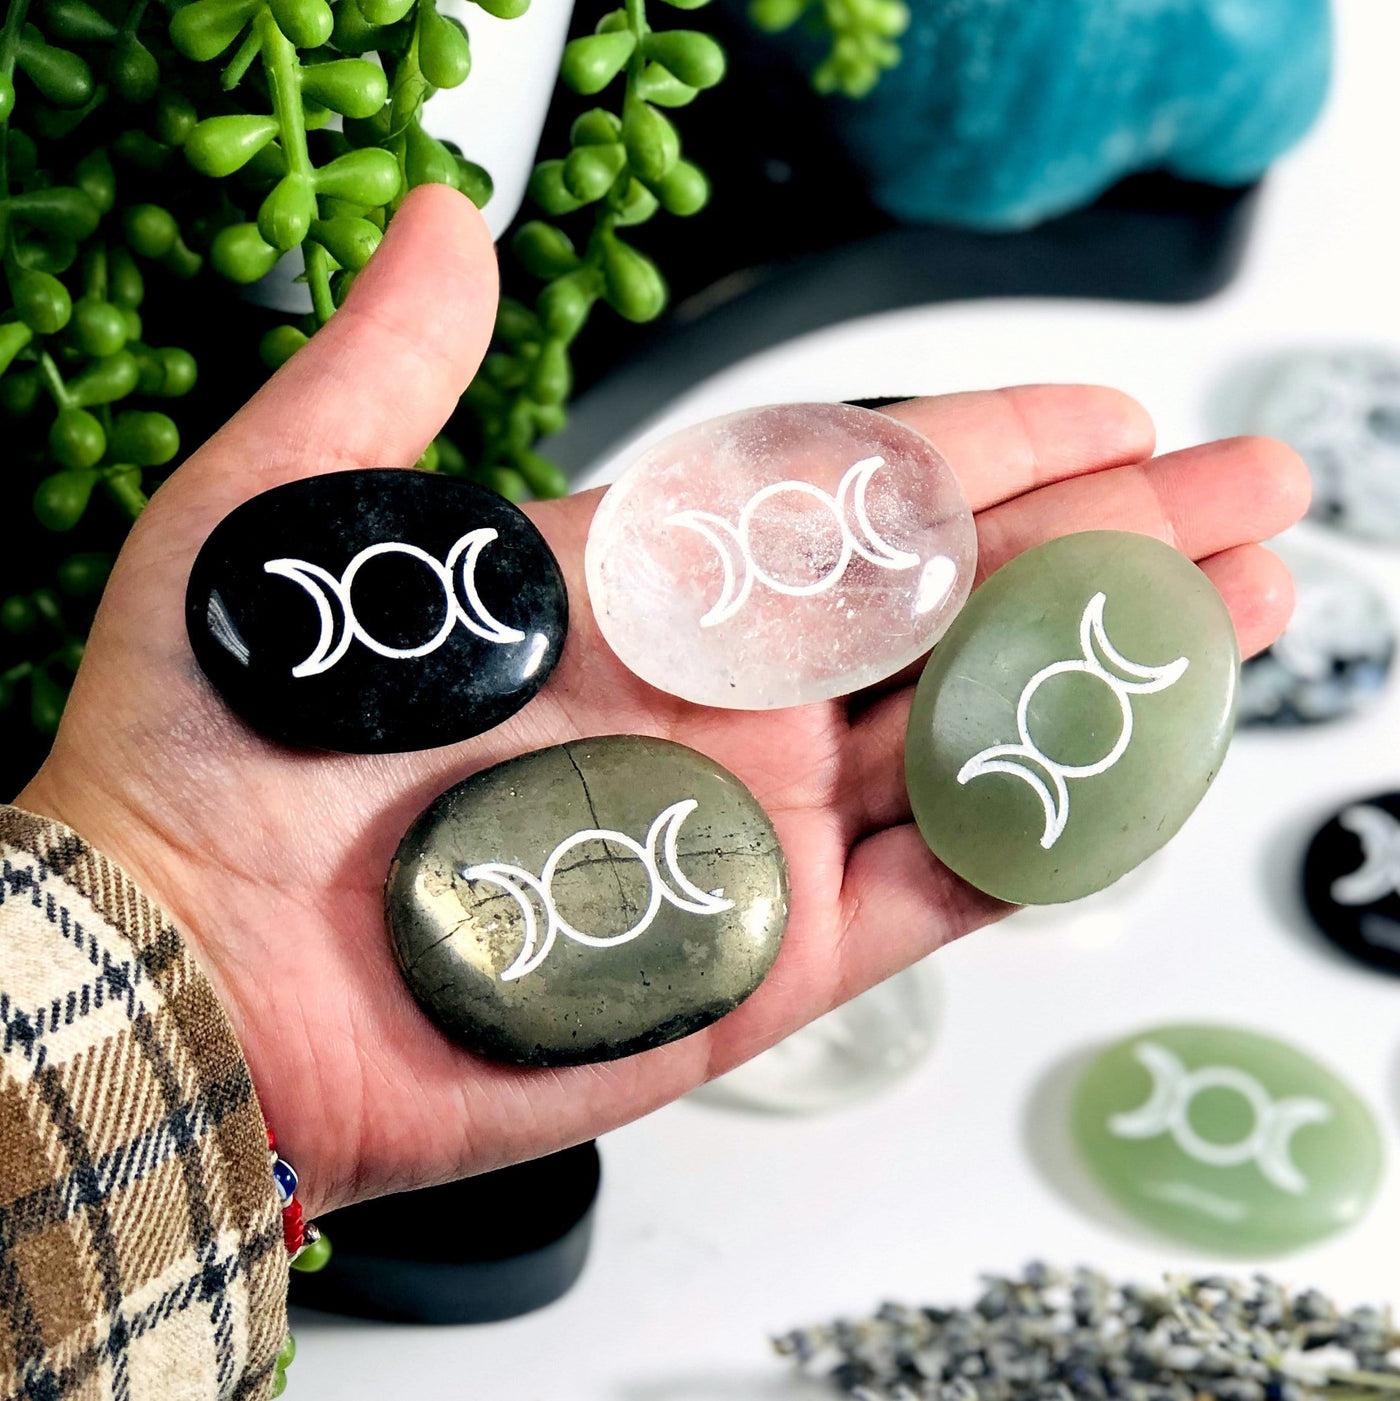 Variety Palm Stones Pocket Stones with Moon Phase  in a hand